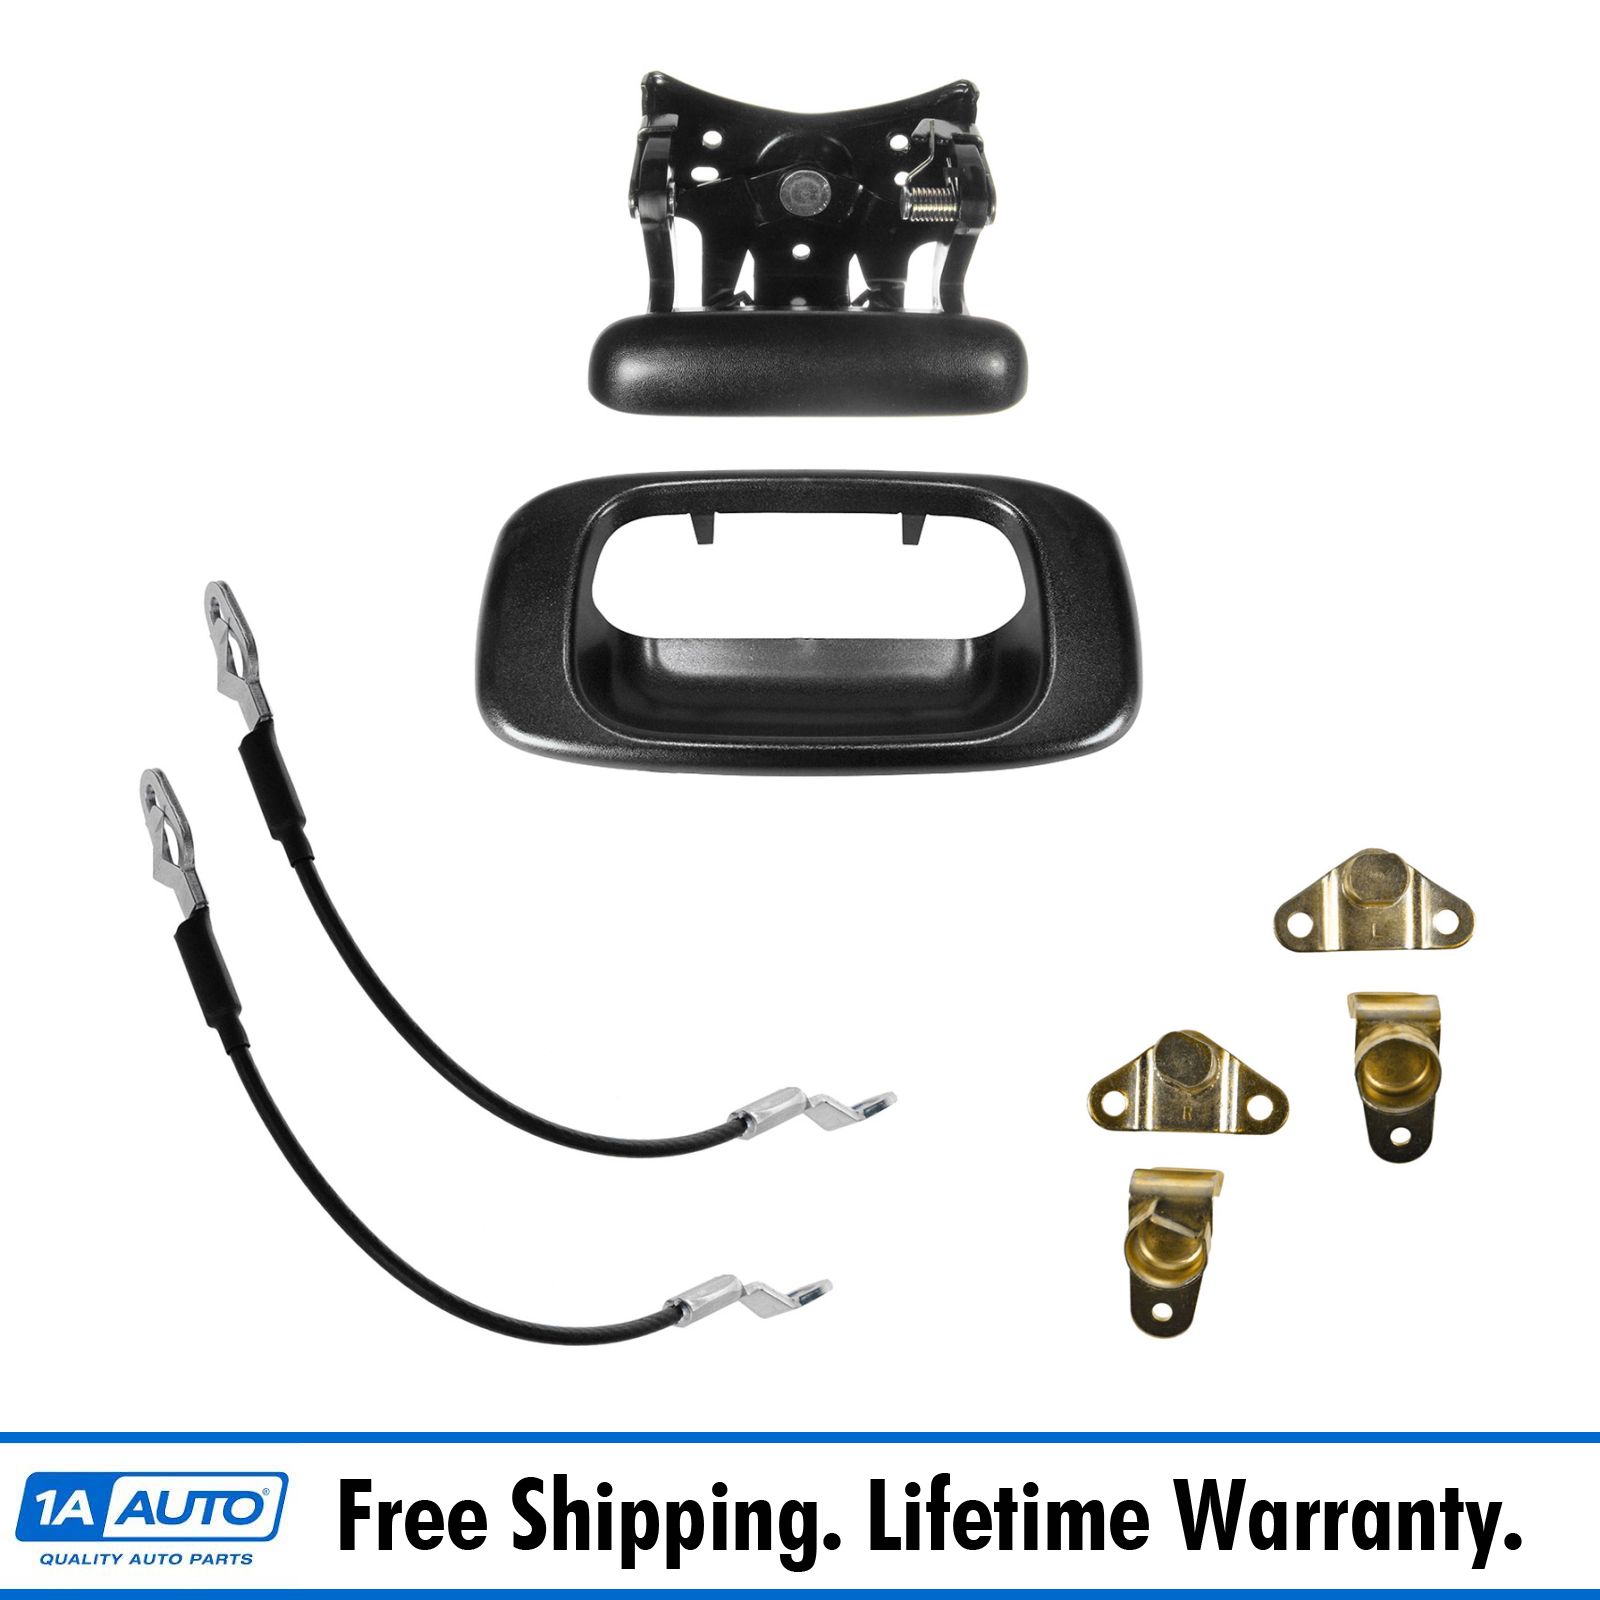 Tailgate Handle Cables Hinges Repair Kit Set For Chevy Silverado Gmc